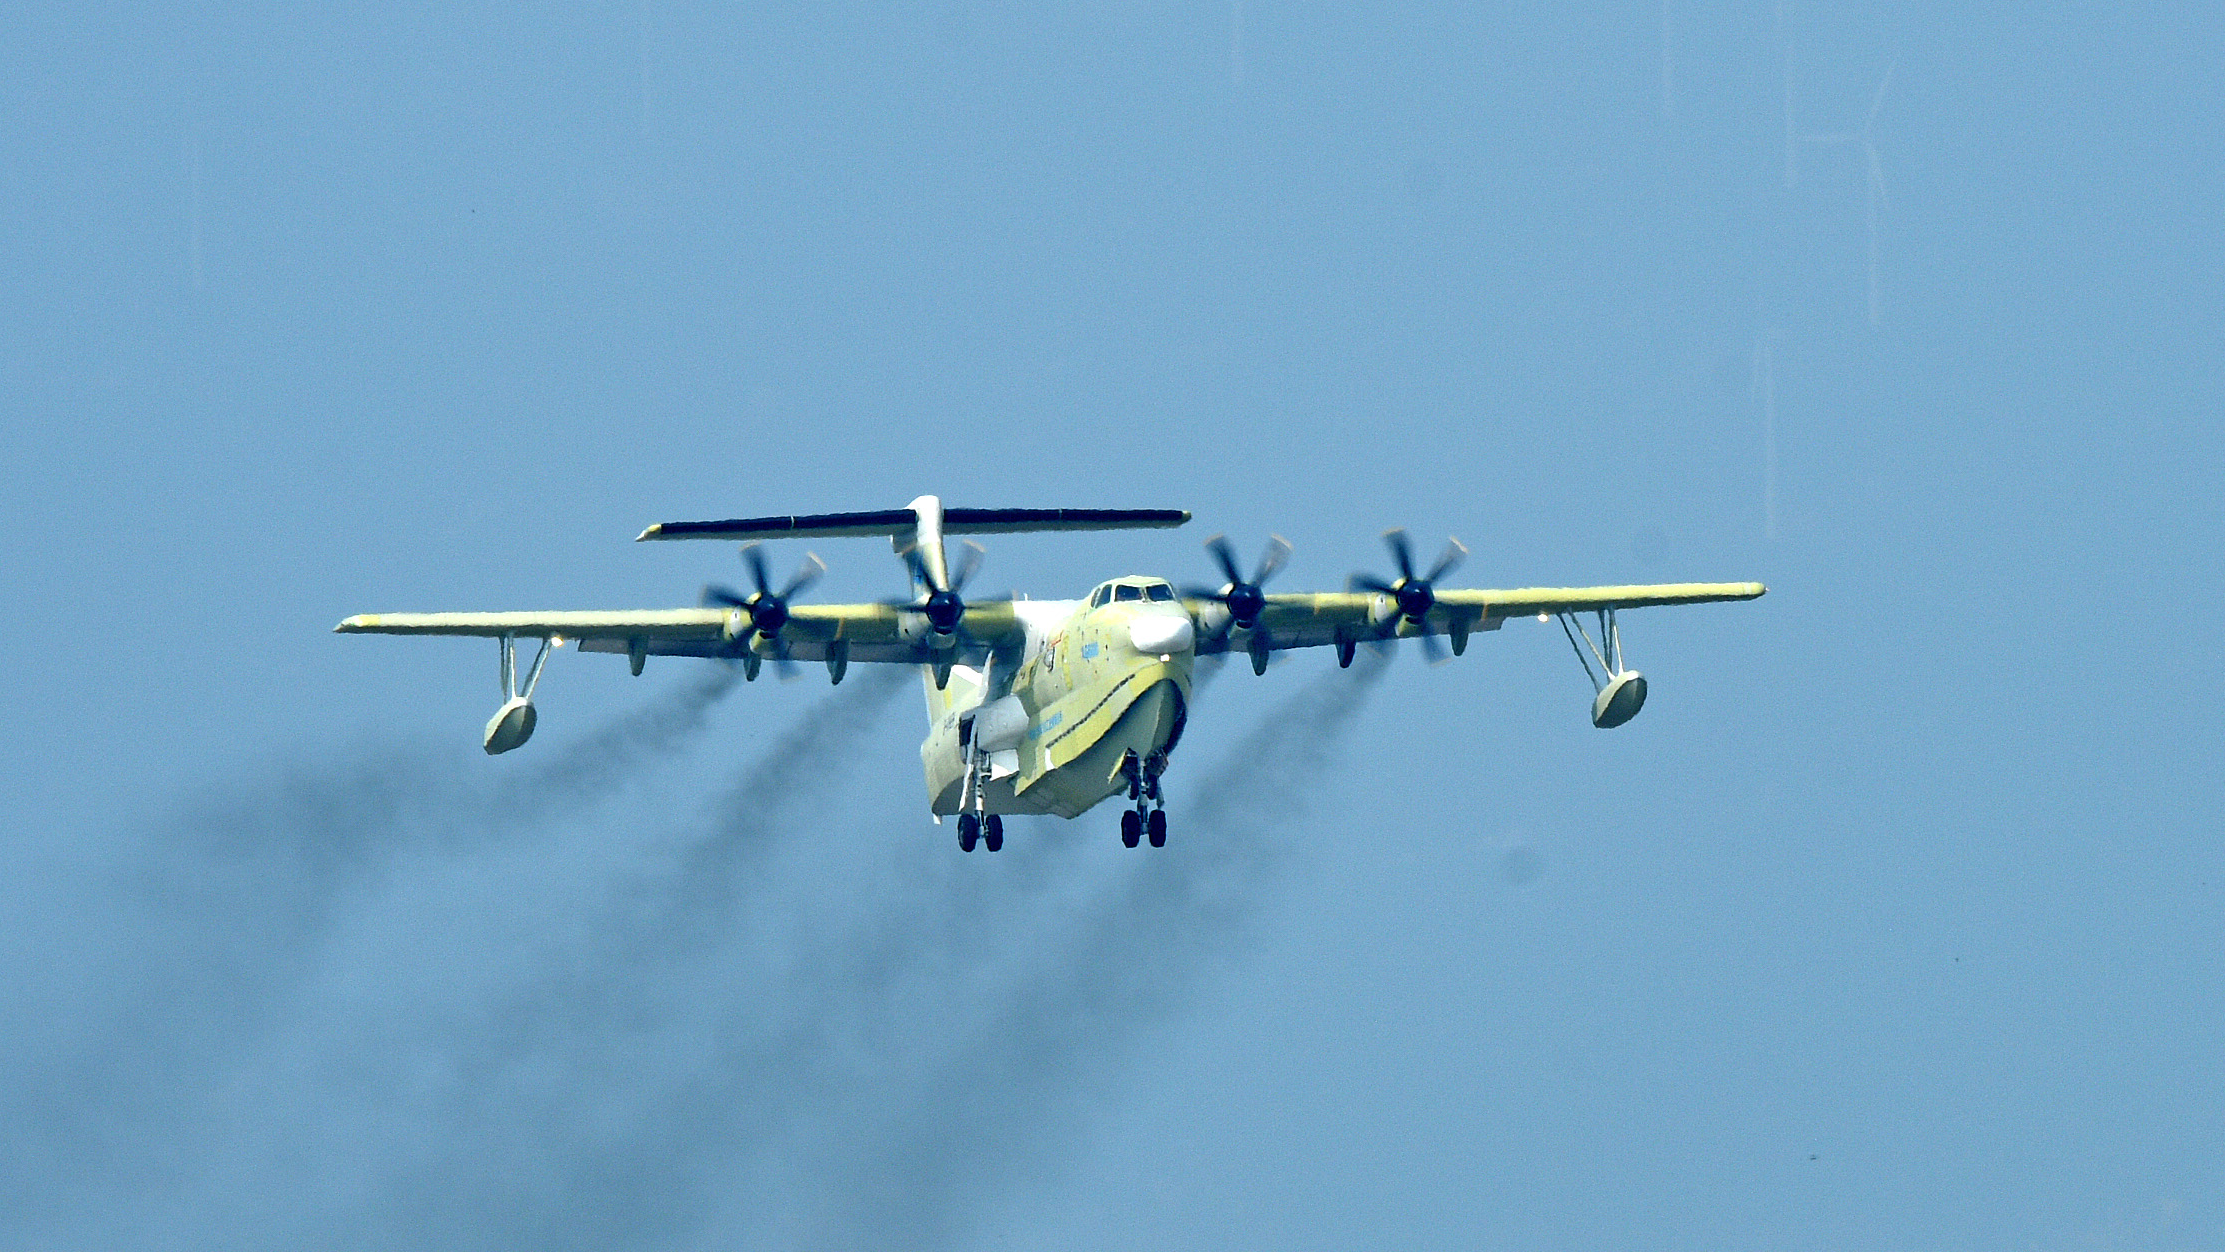 The world's largest amphibious aircraft AG600M has successfully passed the flight test